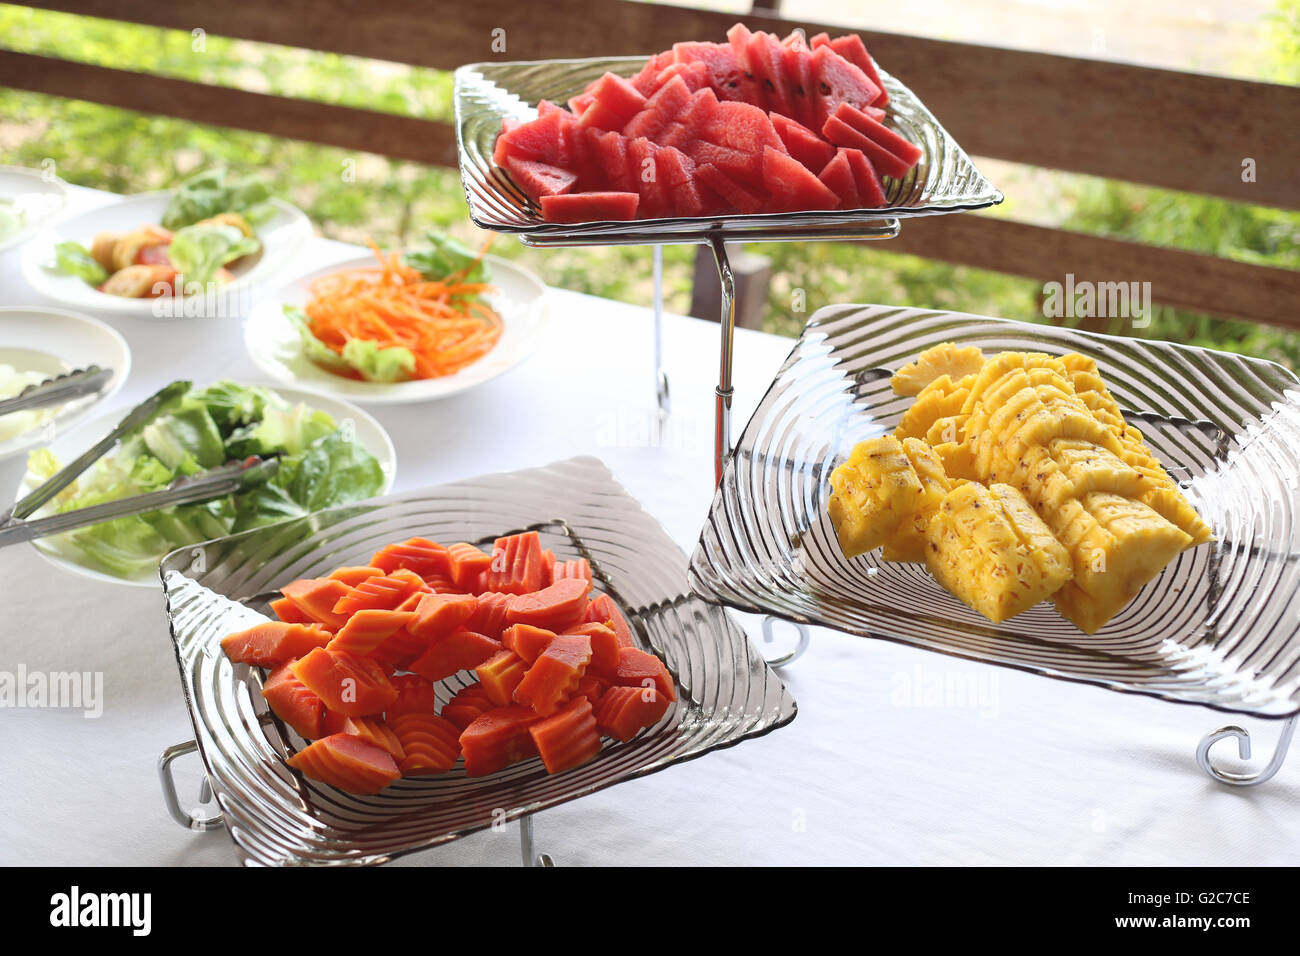 Sliced watermelon Pineapple and ripe papaya of mix fruit in a dish on food table. Stock Photo